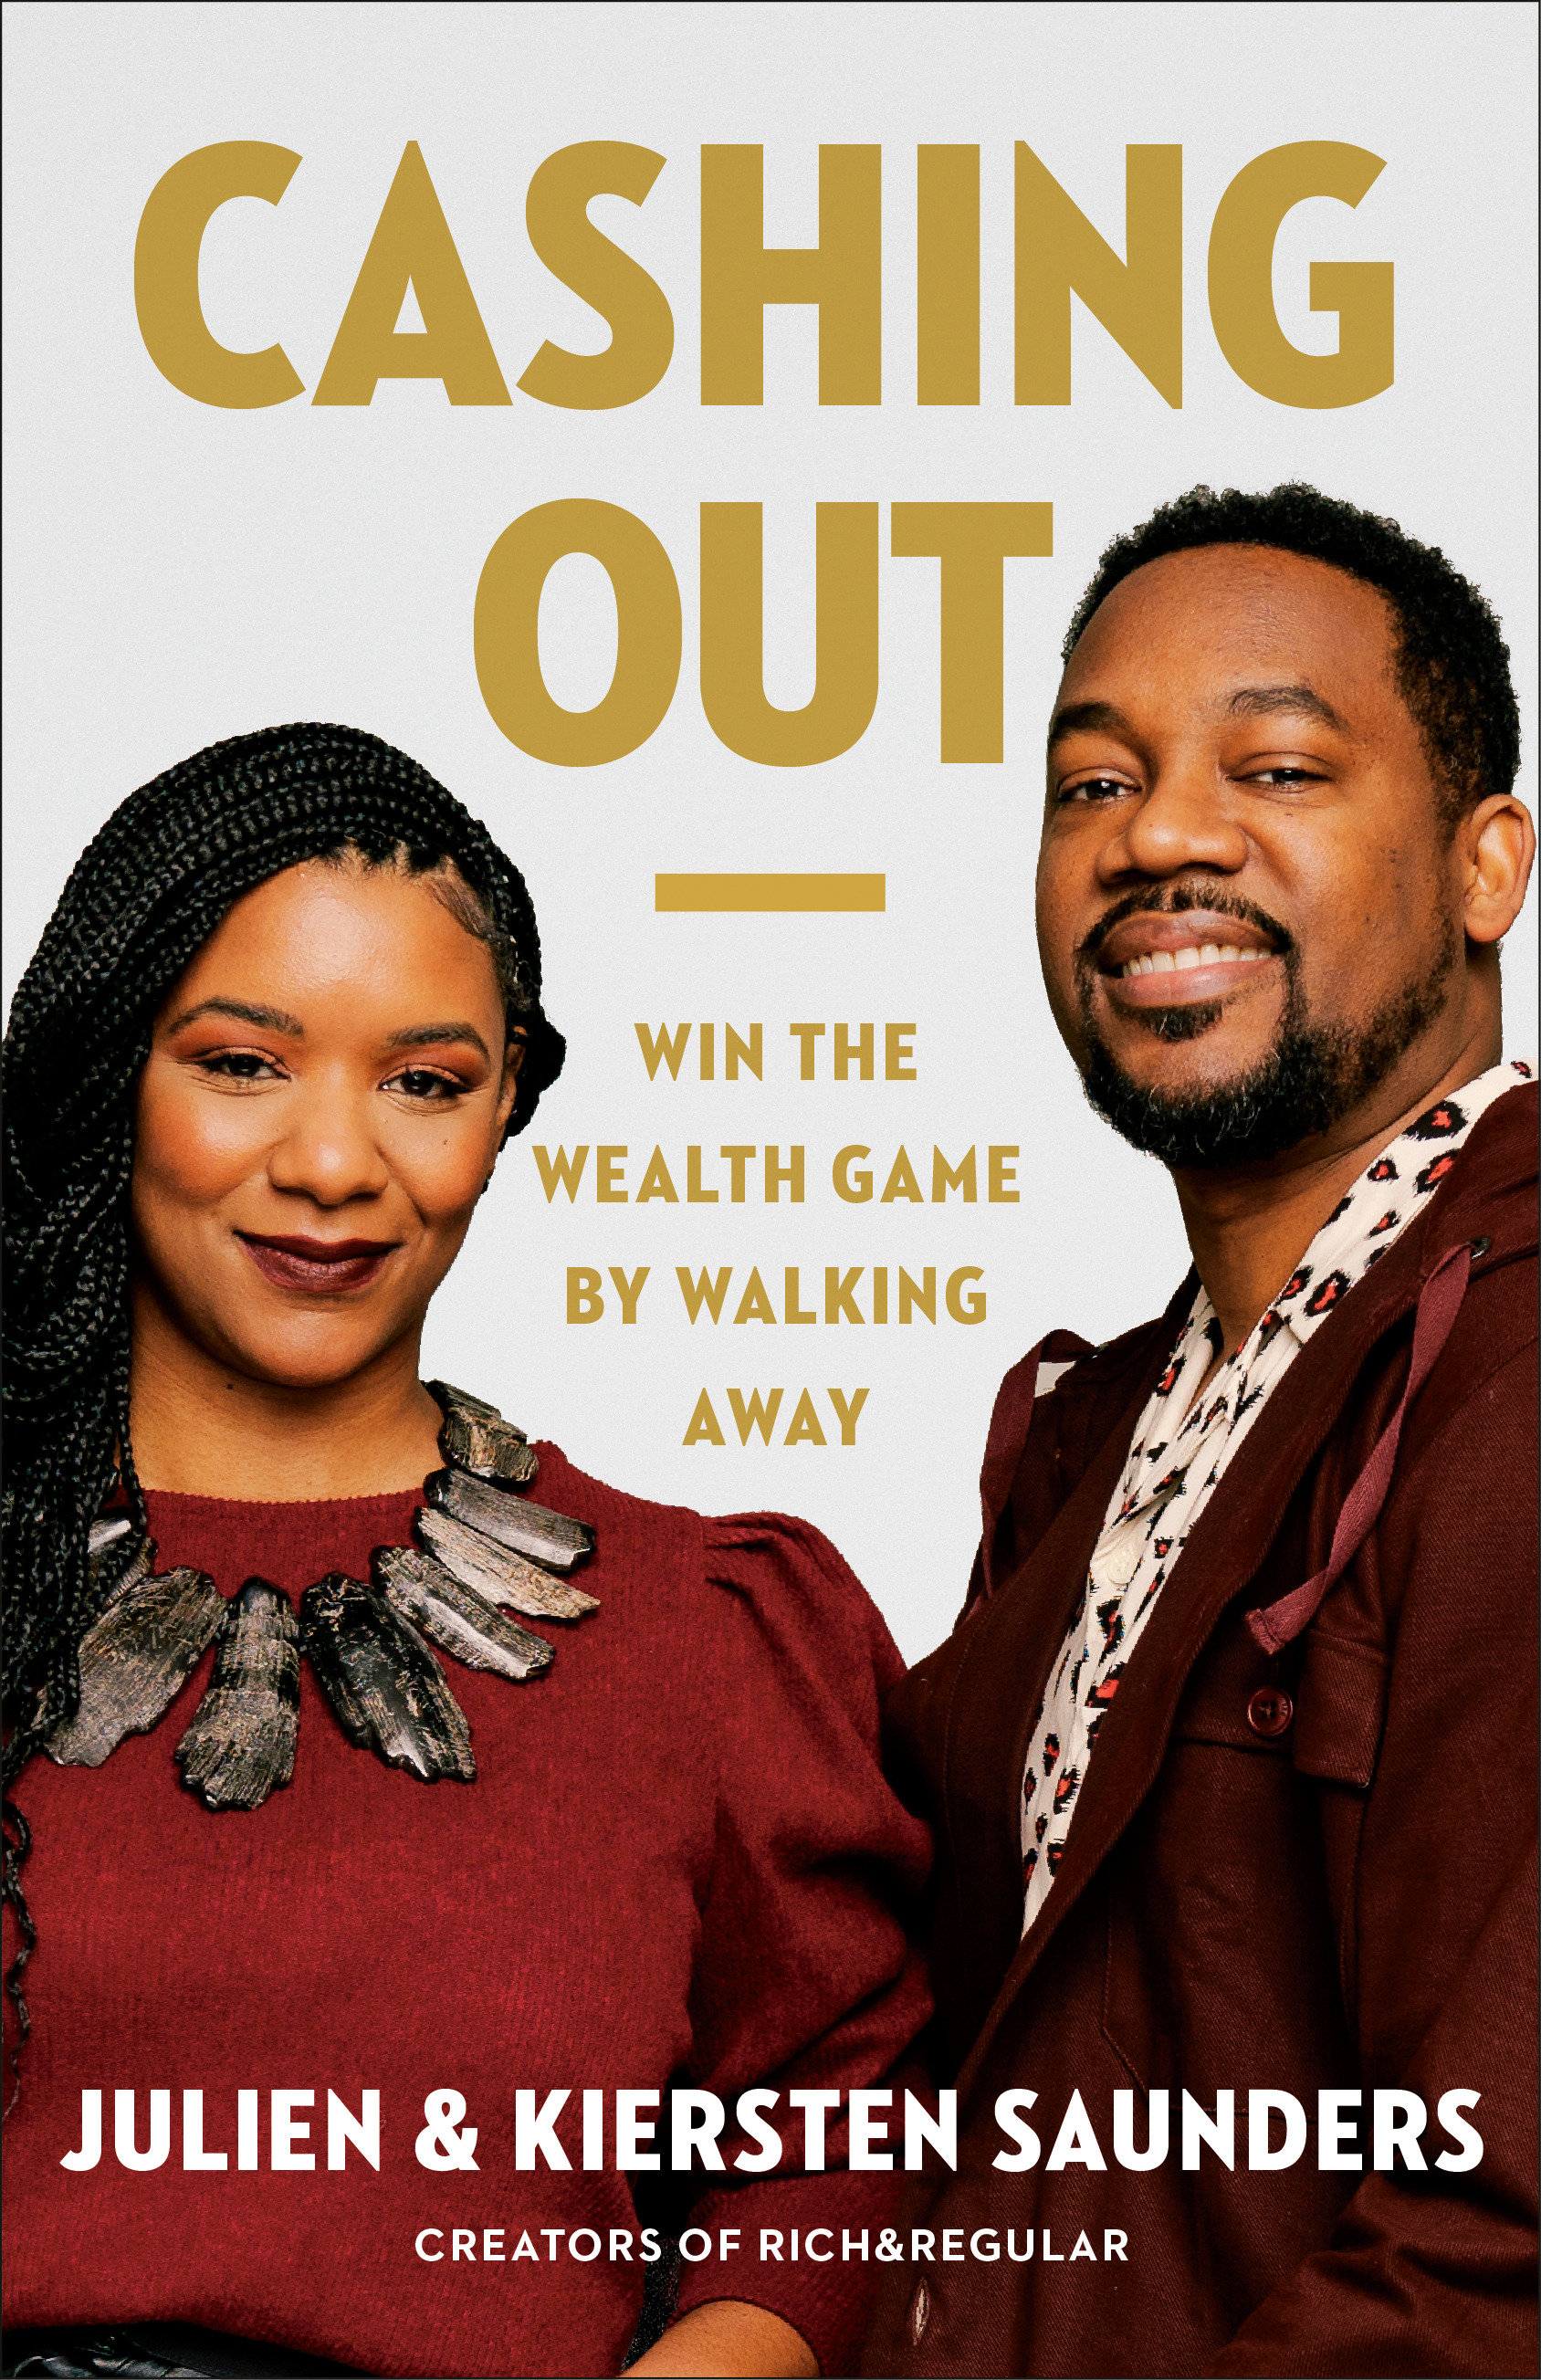 Cashing Out Win the Wealth Game by Walking Away cover image